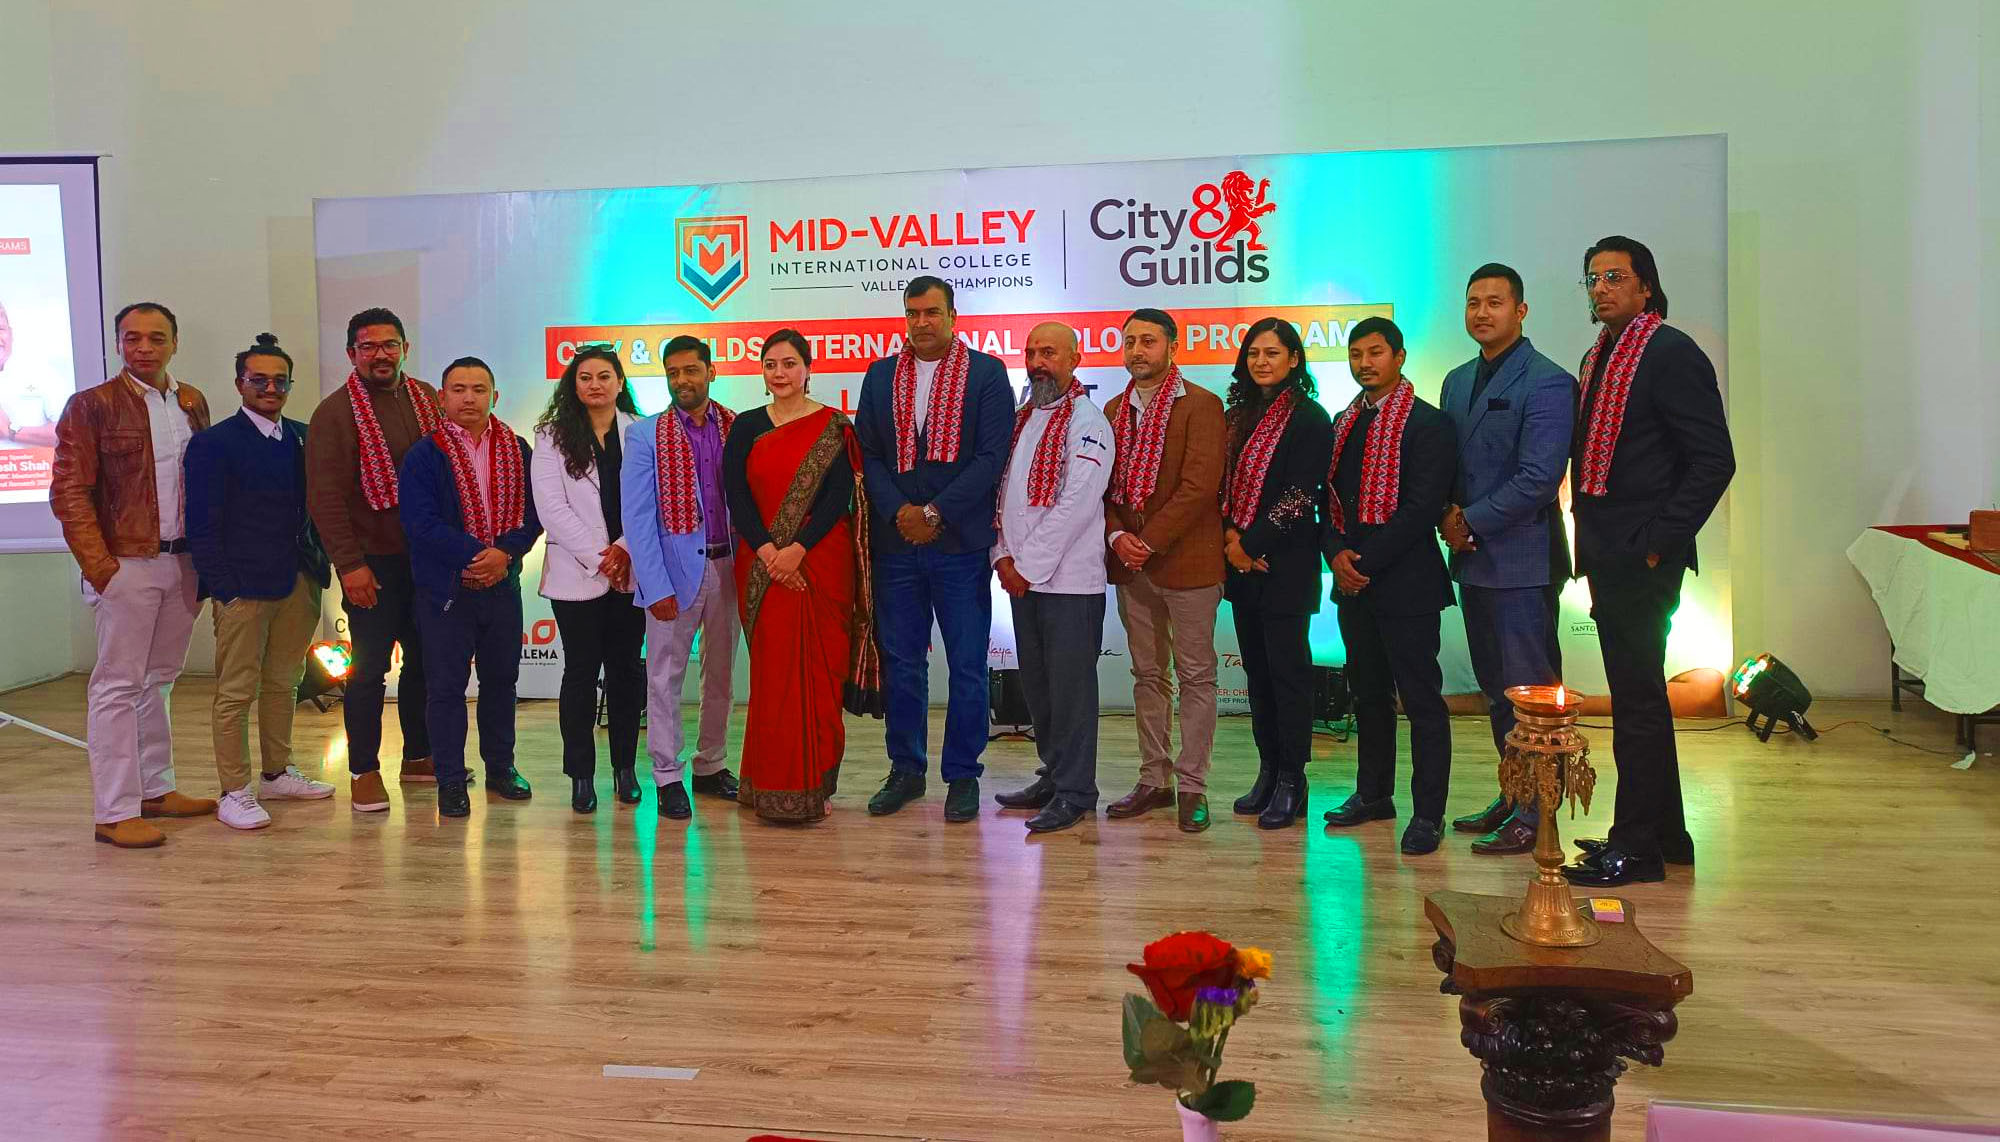 Mid-Valley International College Launched International Diploma Programs affiliated to City and Guilds, UK